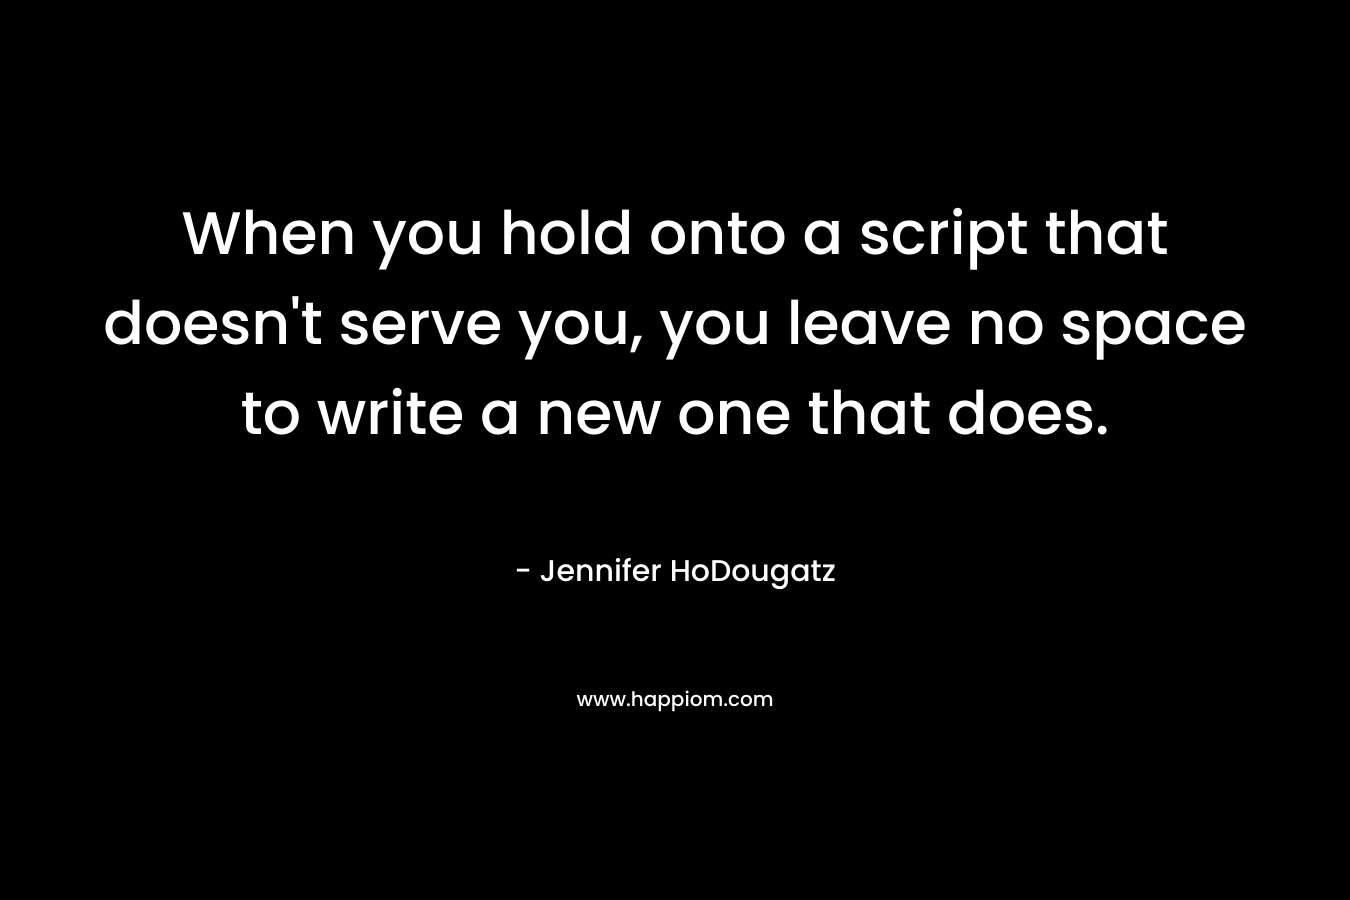 When you hold onto a script that doesn’t serve you, you leave no space to write a new one that does. – Jennifer HoDougatz